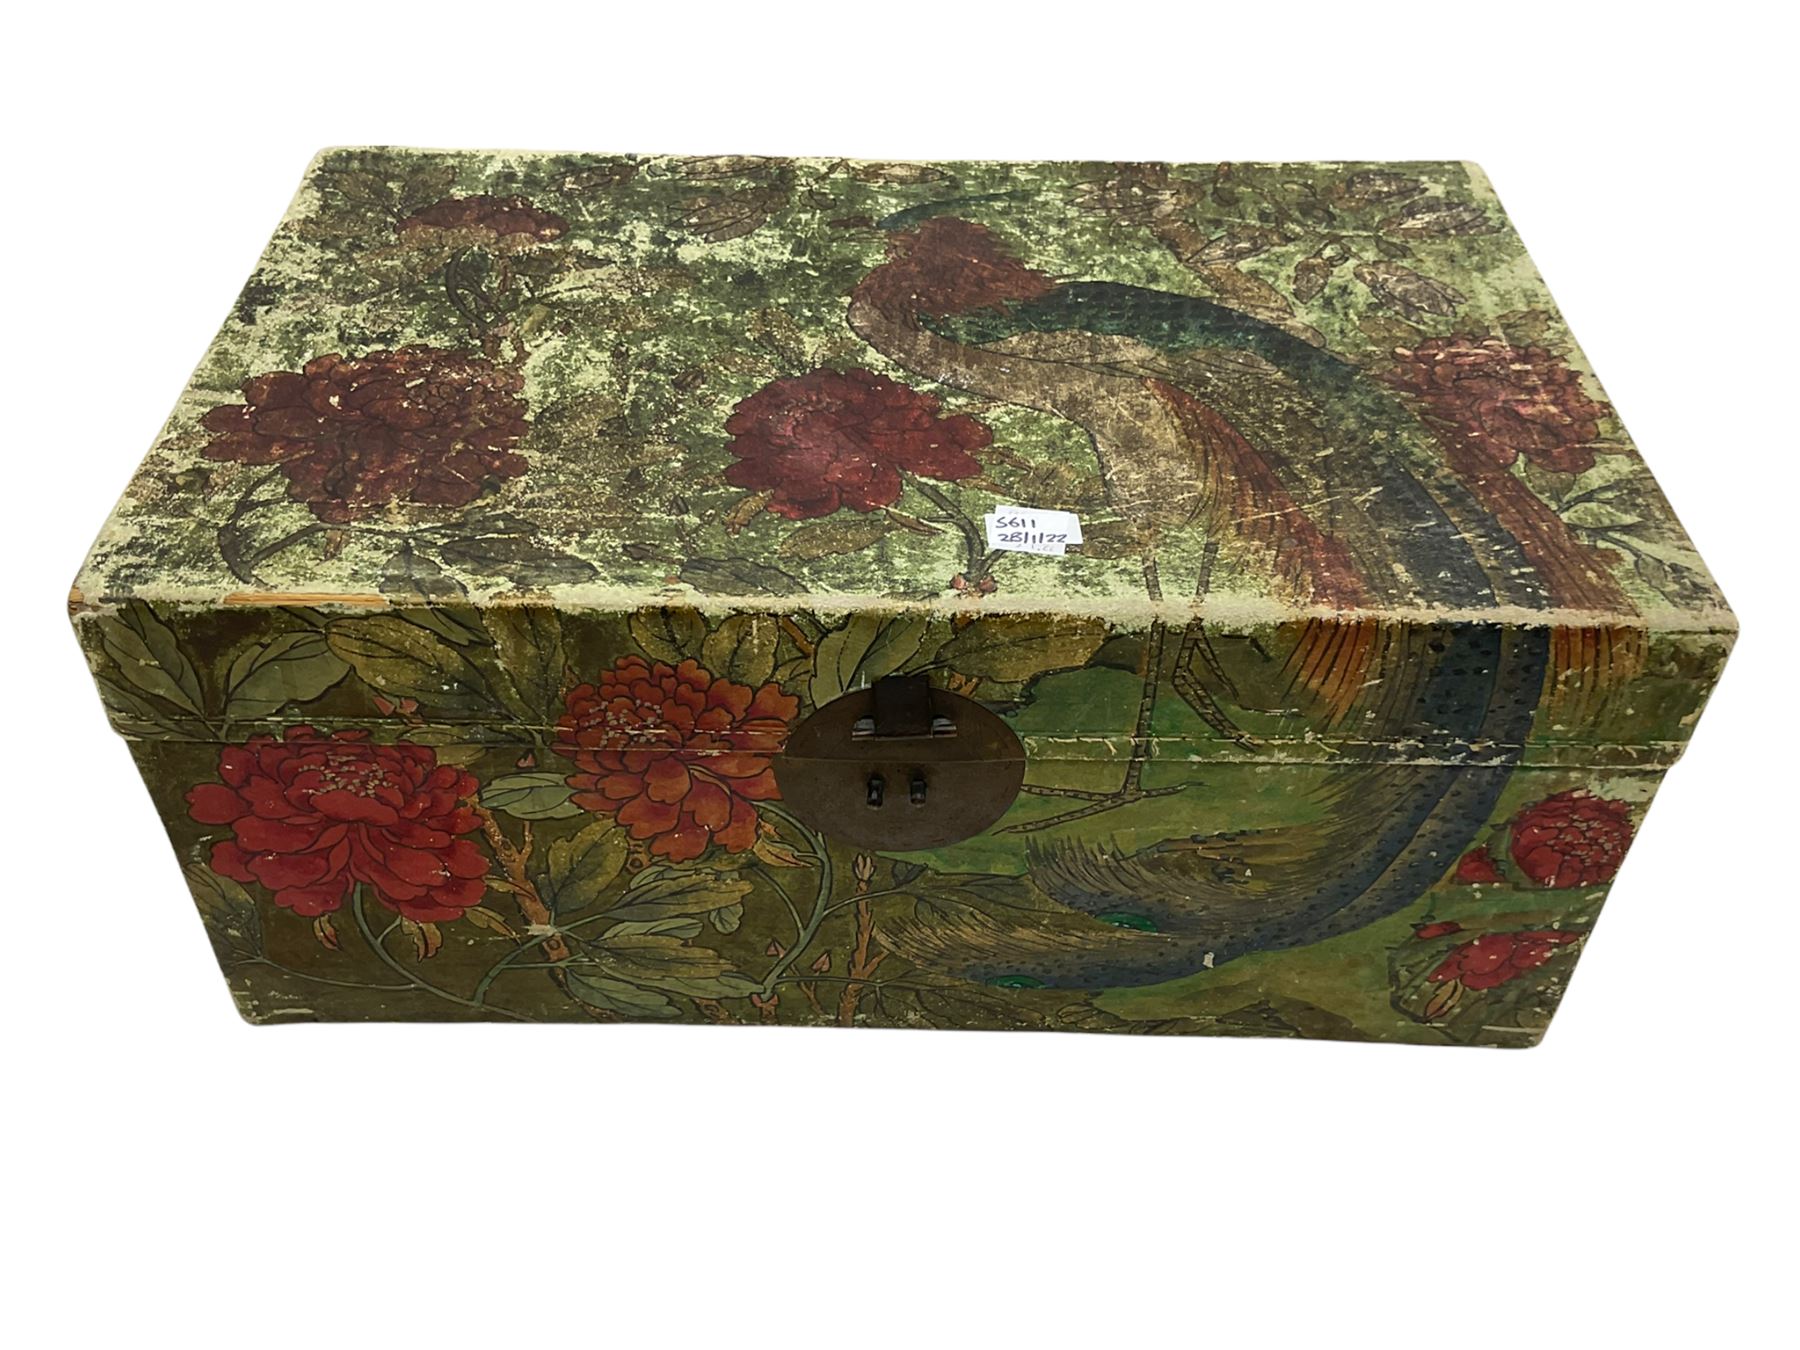 Camphor wood sea chest and a painted covered trunk - Image 5 of 11